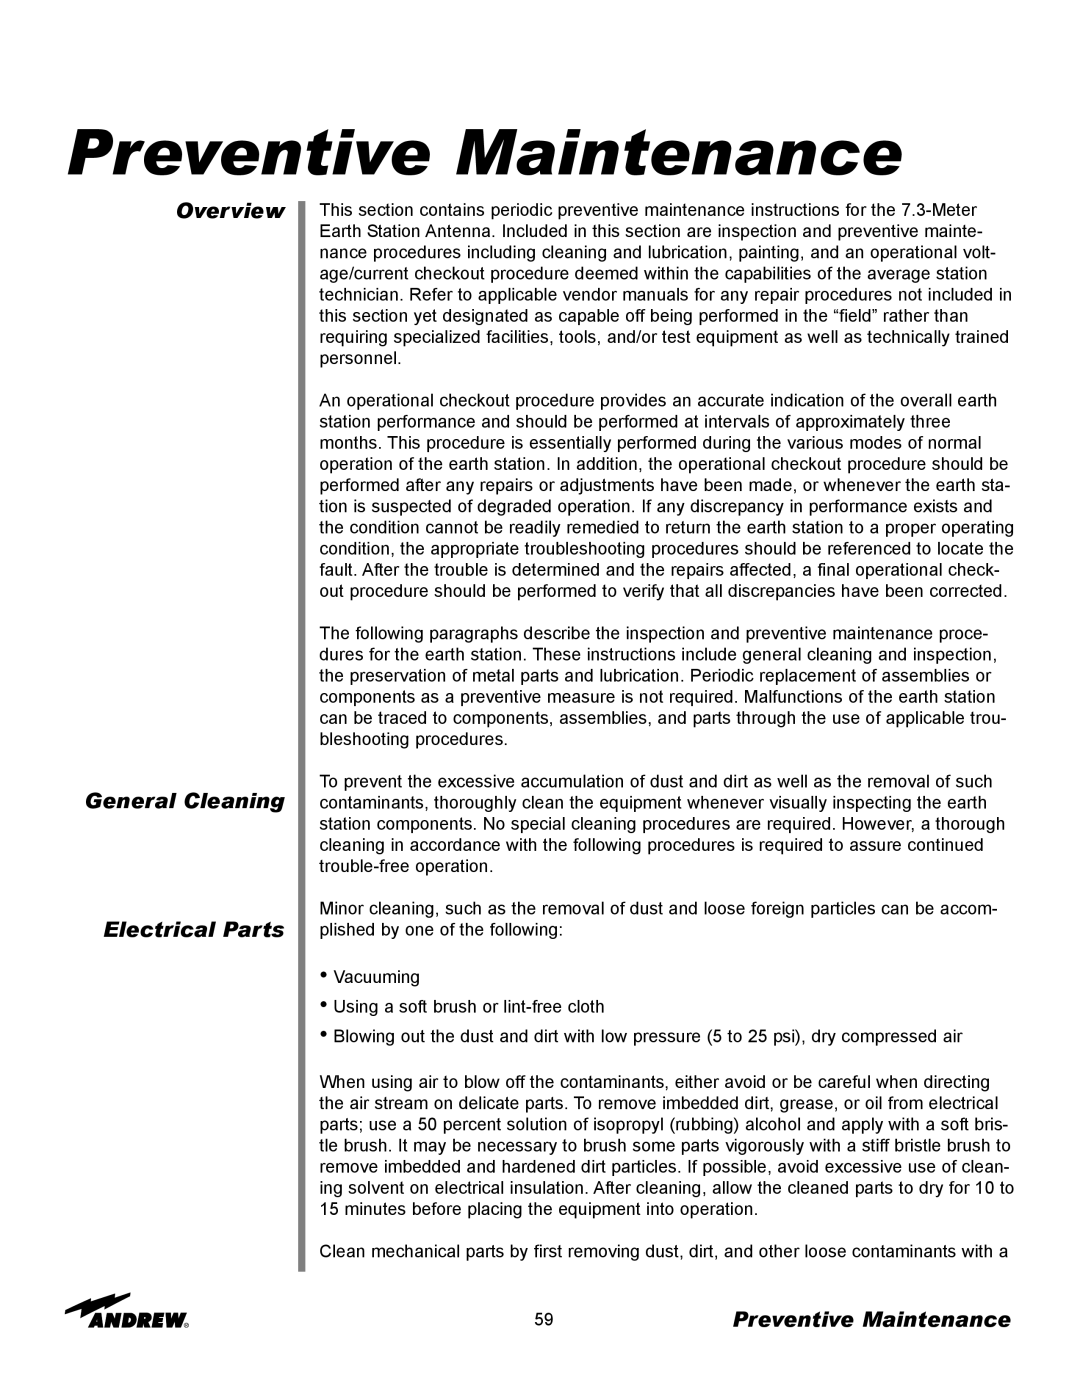 Andrew ES73 manual Preventive Maintenance, Overview General Cleaning Electrical Parts 